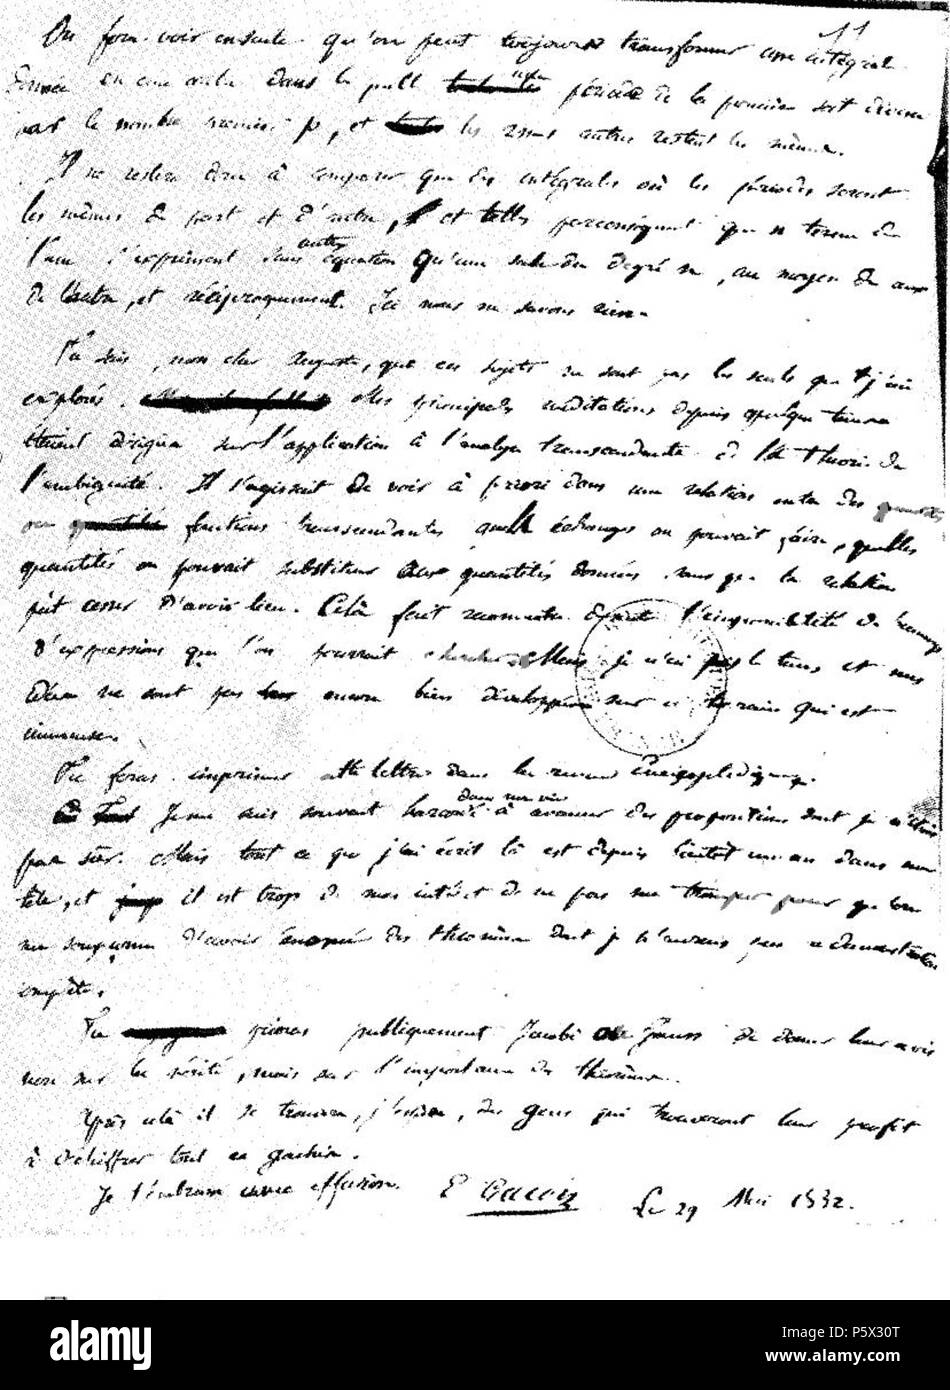 N/A. This is the last page of letter from Évariste Galois, French mathematician, to his friend Auguste Chevalier. 29 May 1832.    Évariste Galois  (1811–1832)       Alternative names Evariste Galois  Description French mathematician  Date of birth/death 25 October 1811 31 May 1832  Location of birth/death Bourg-la-Reine Paris  Work location Paris  Authority control  : Q7091 VIAF:49225861 ISNI:0000 0001 0898 3441 LCCN:n81028328 NLA:35084589 MGP:55176 WorldCat 490 E. Galois Letter Stock Photo